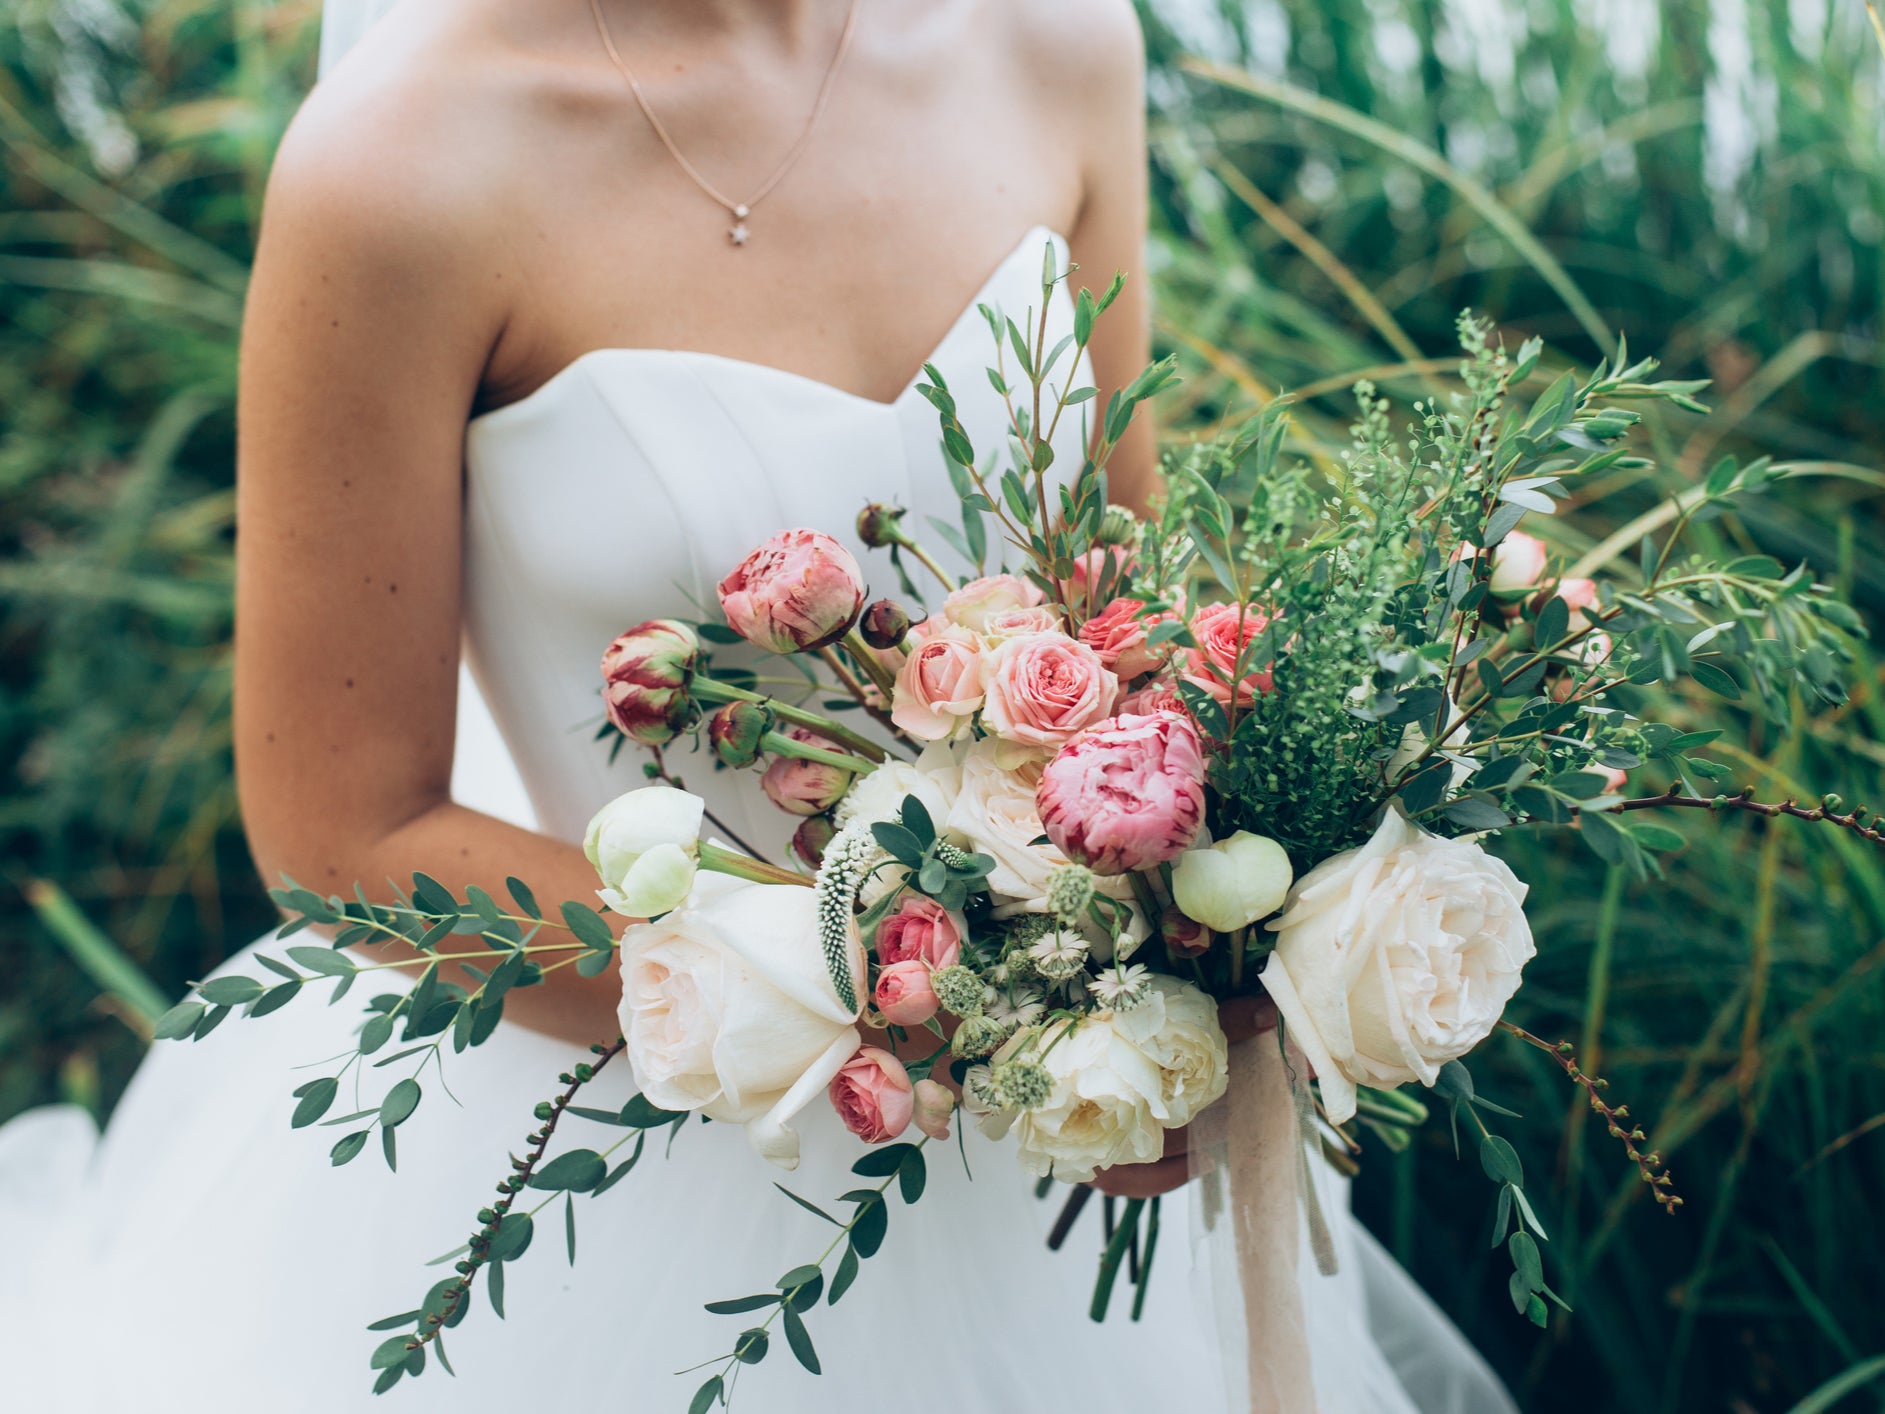 A bride holds a bouquet of flowers